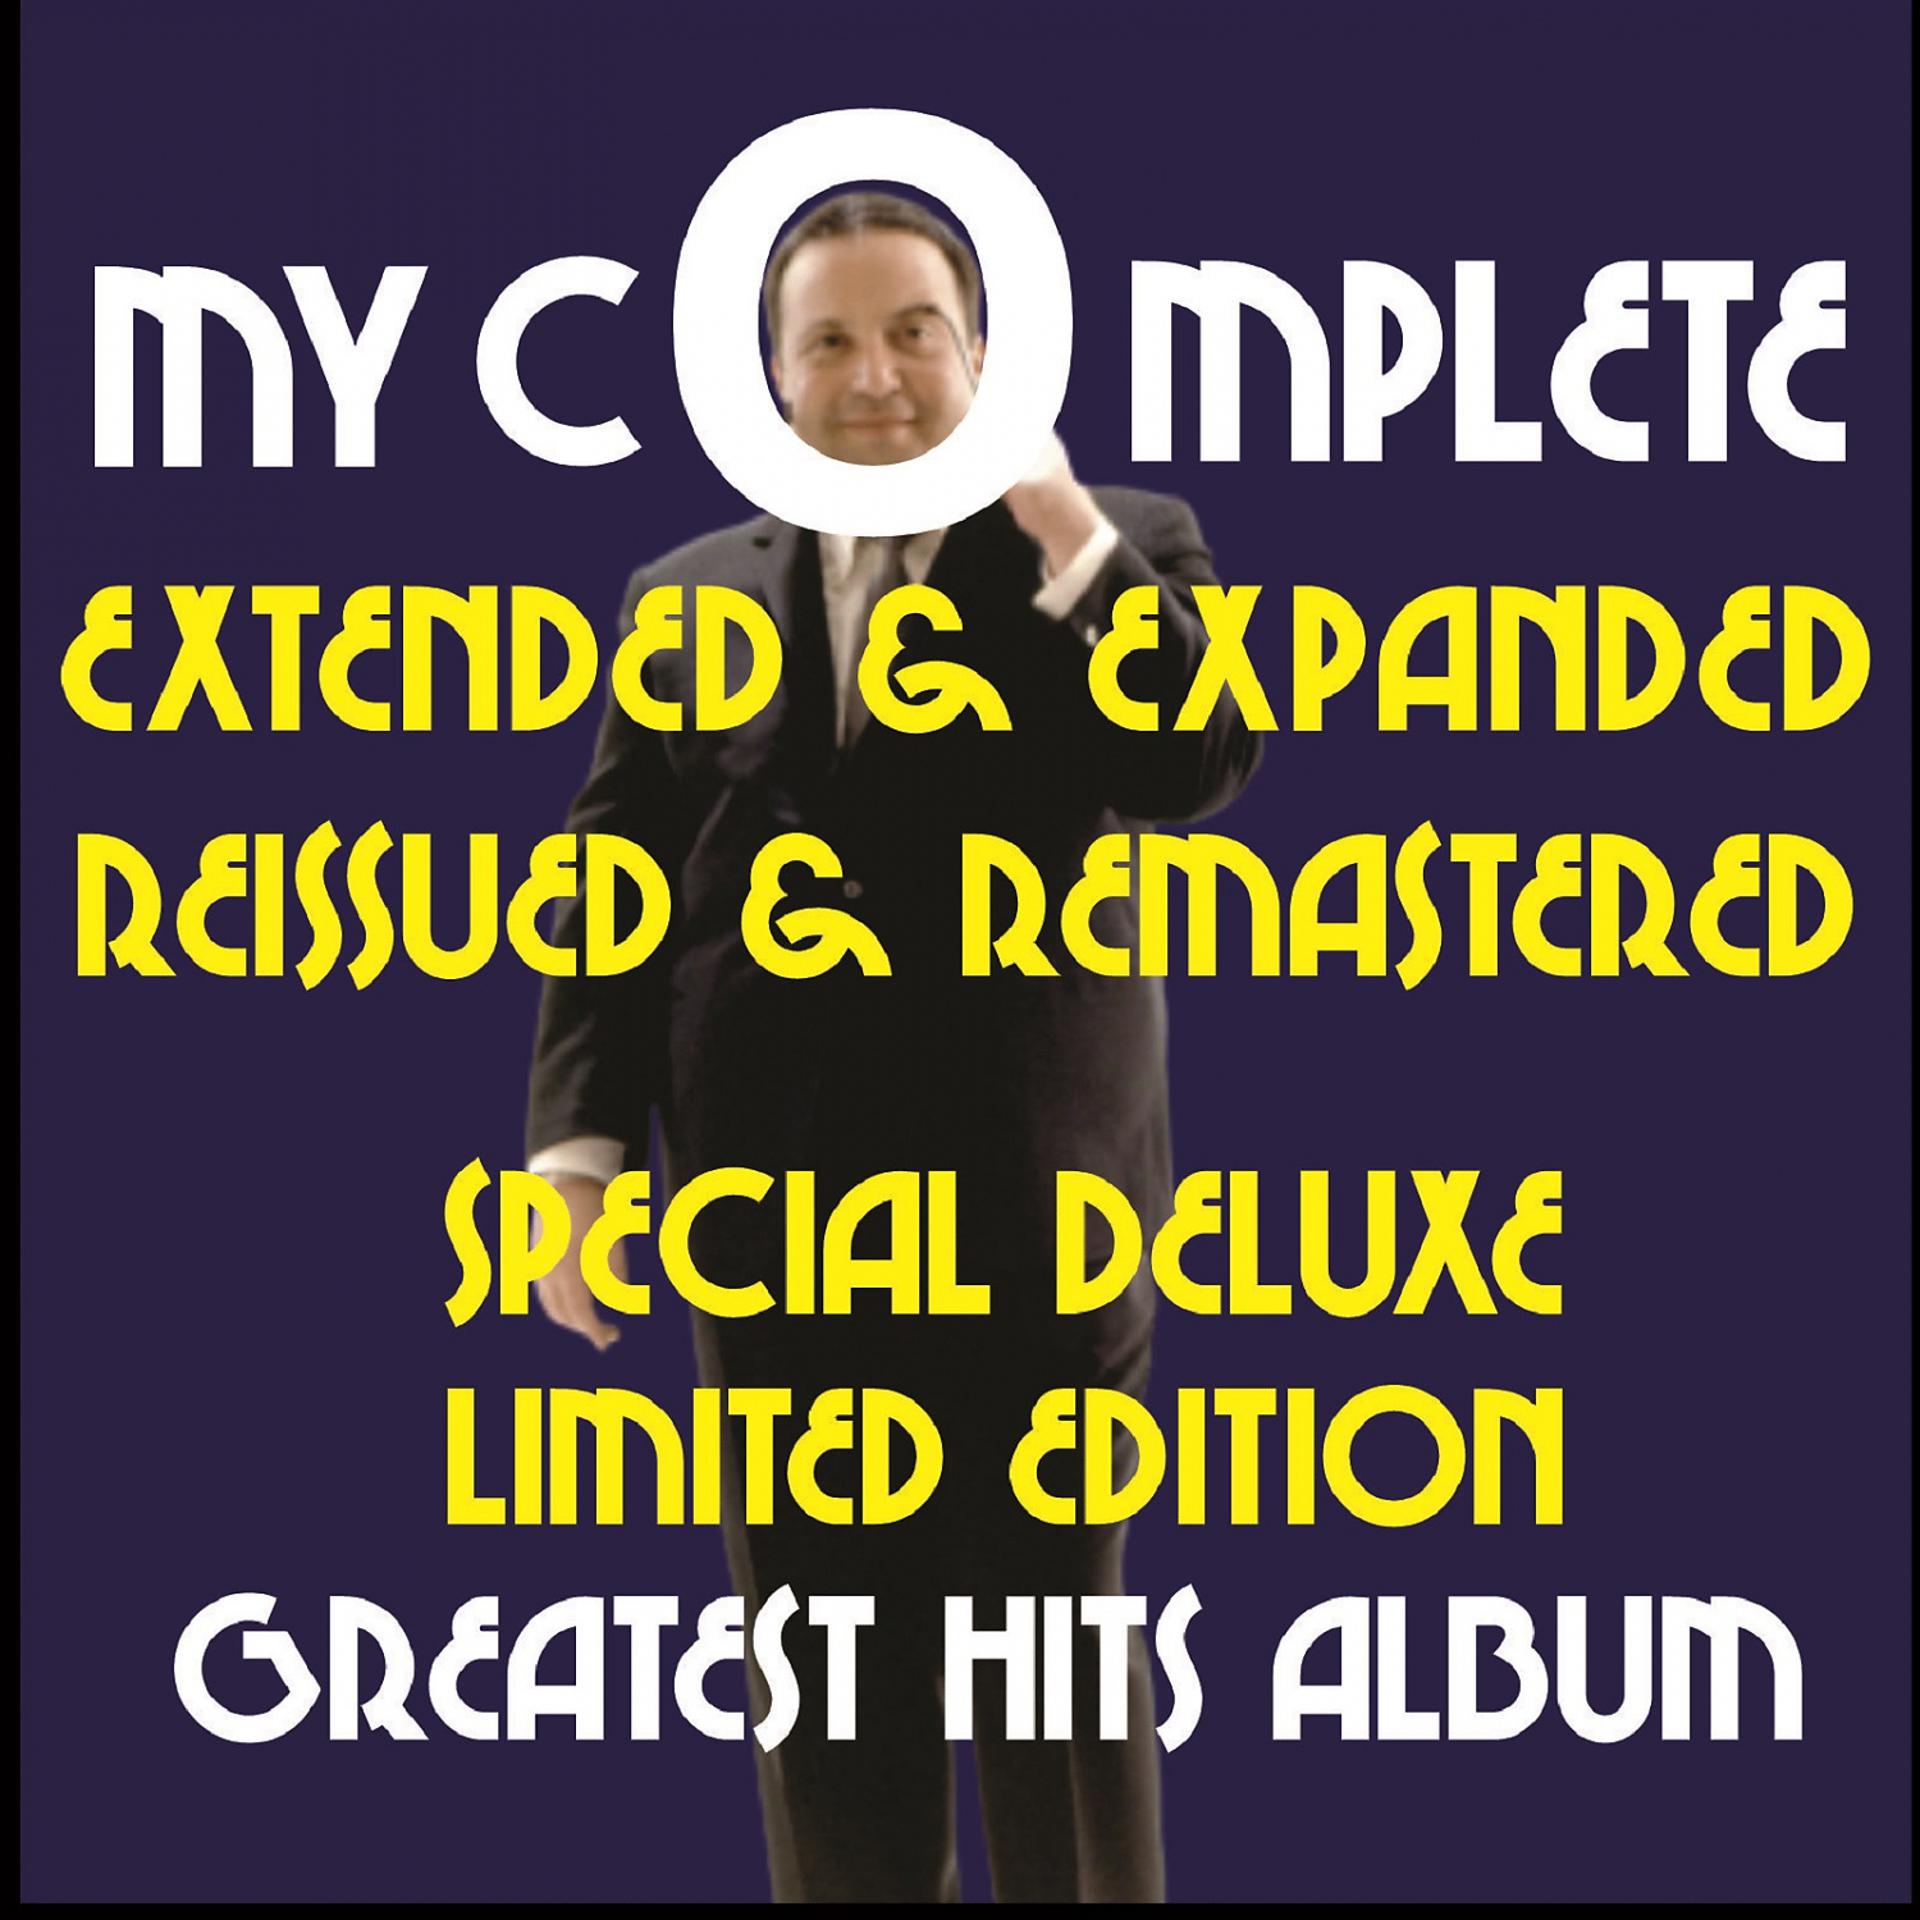 Постер альбома My Complete Extended + Expanded Remastered + Reissued Special Deluxe Limited Edition Greatest Hits Album